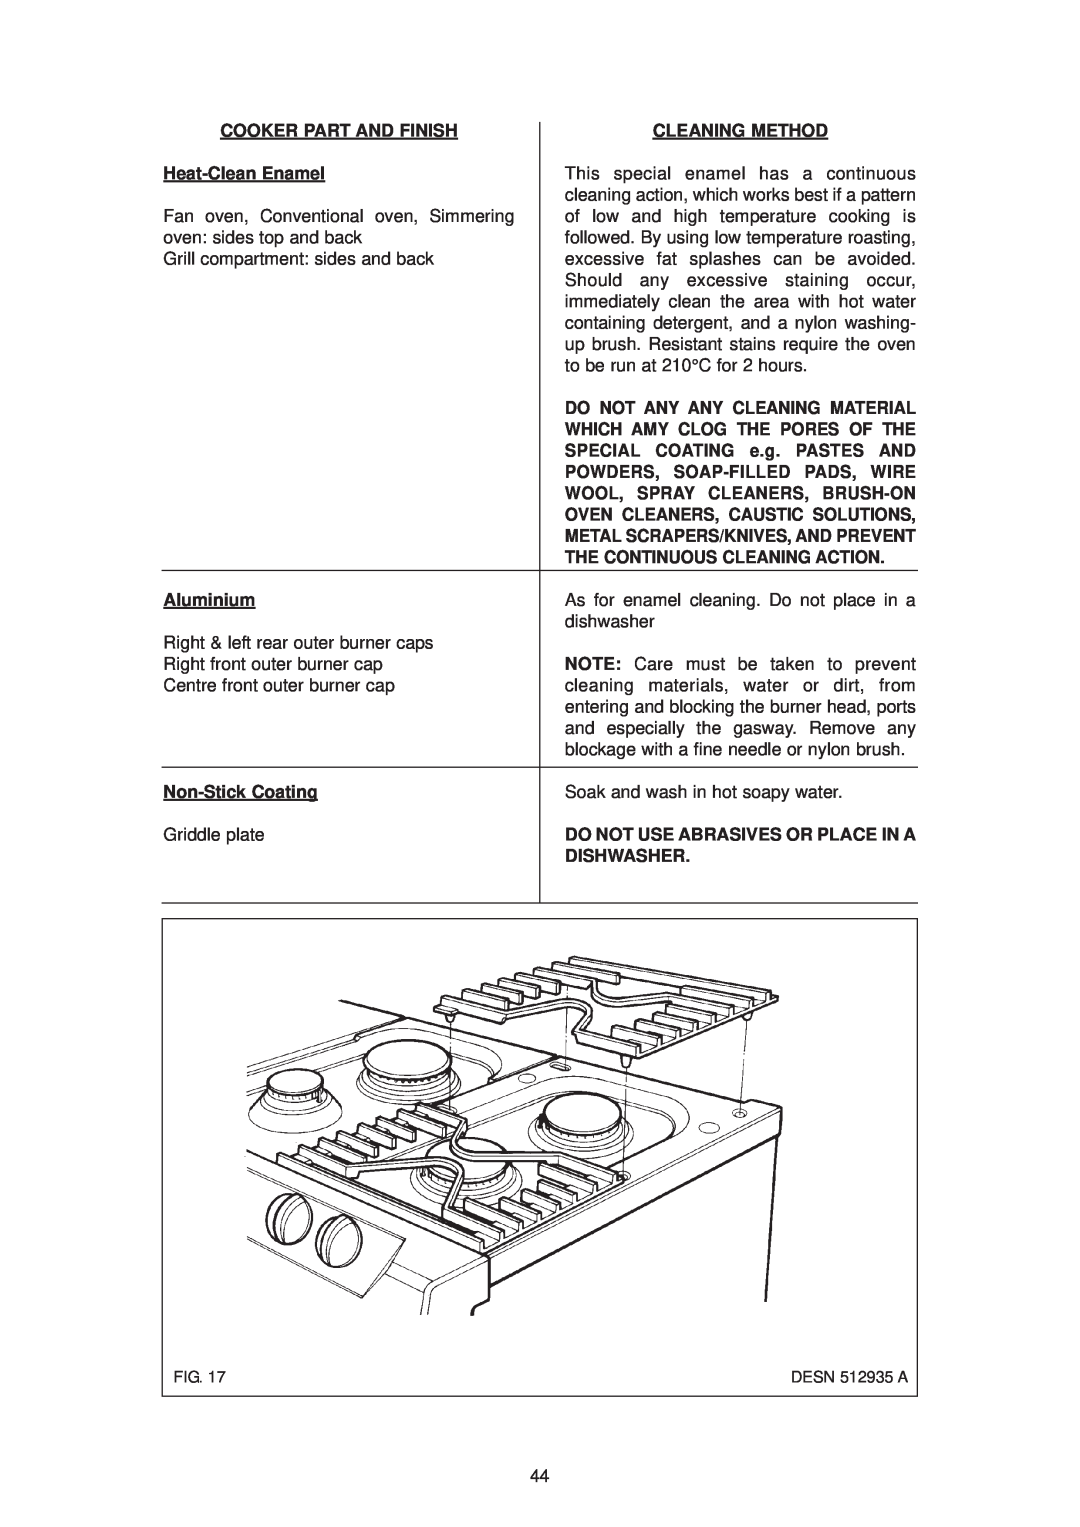 Aga Ranges dc6 Cooker Part And Finish, Cleaning Method, Heat-Clean Enamel, Do Not Any Any Cleaning Material, Aluminium 